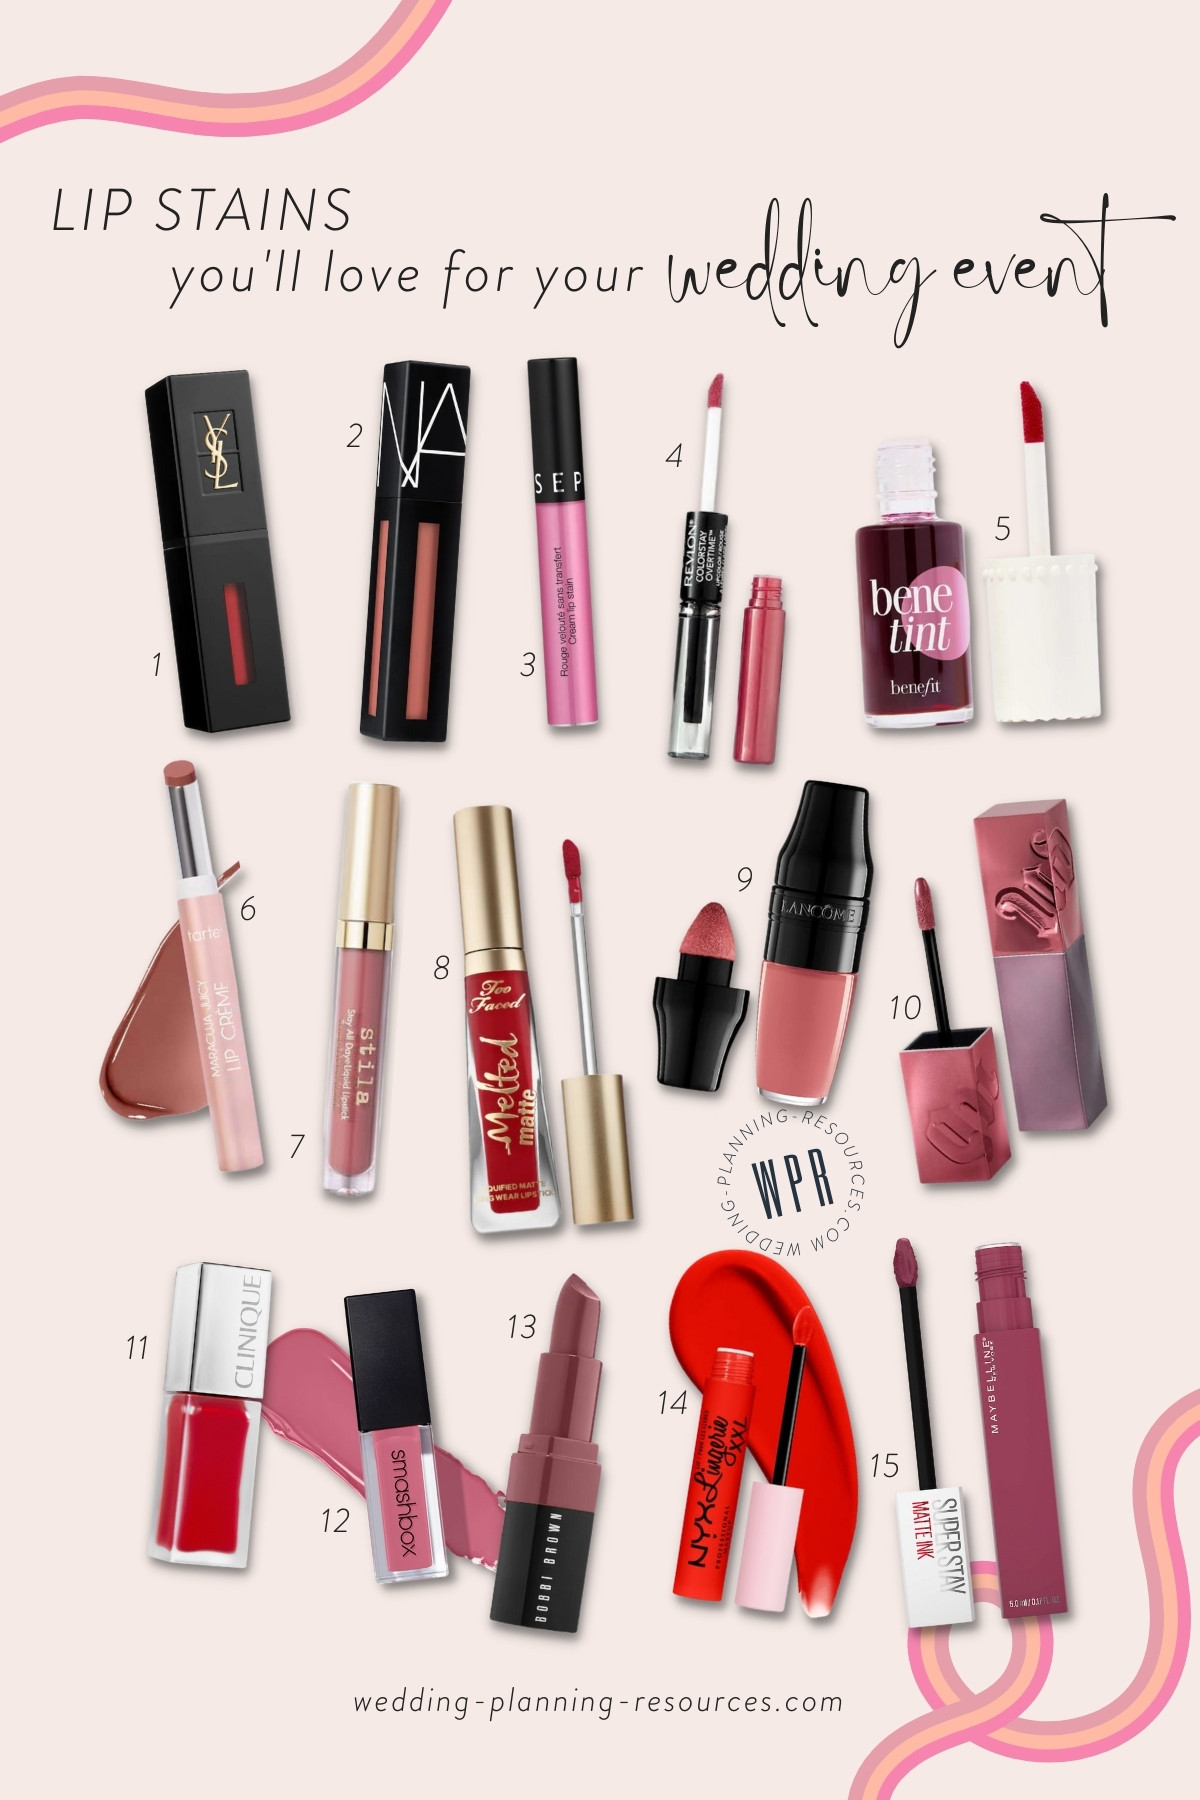 Lip Stains For Your Wedding Event: Top 15 You'll Love